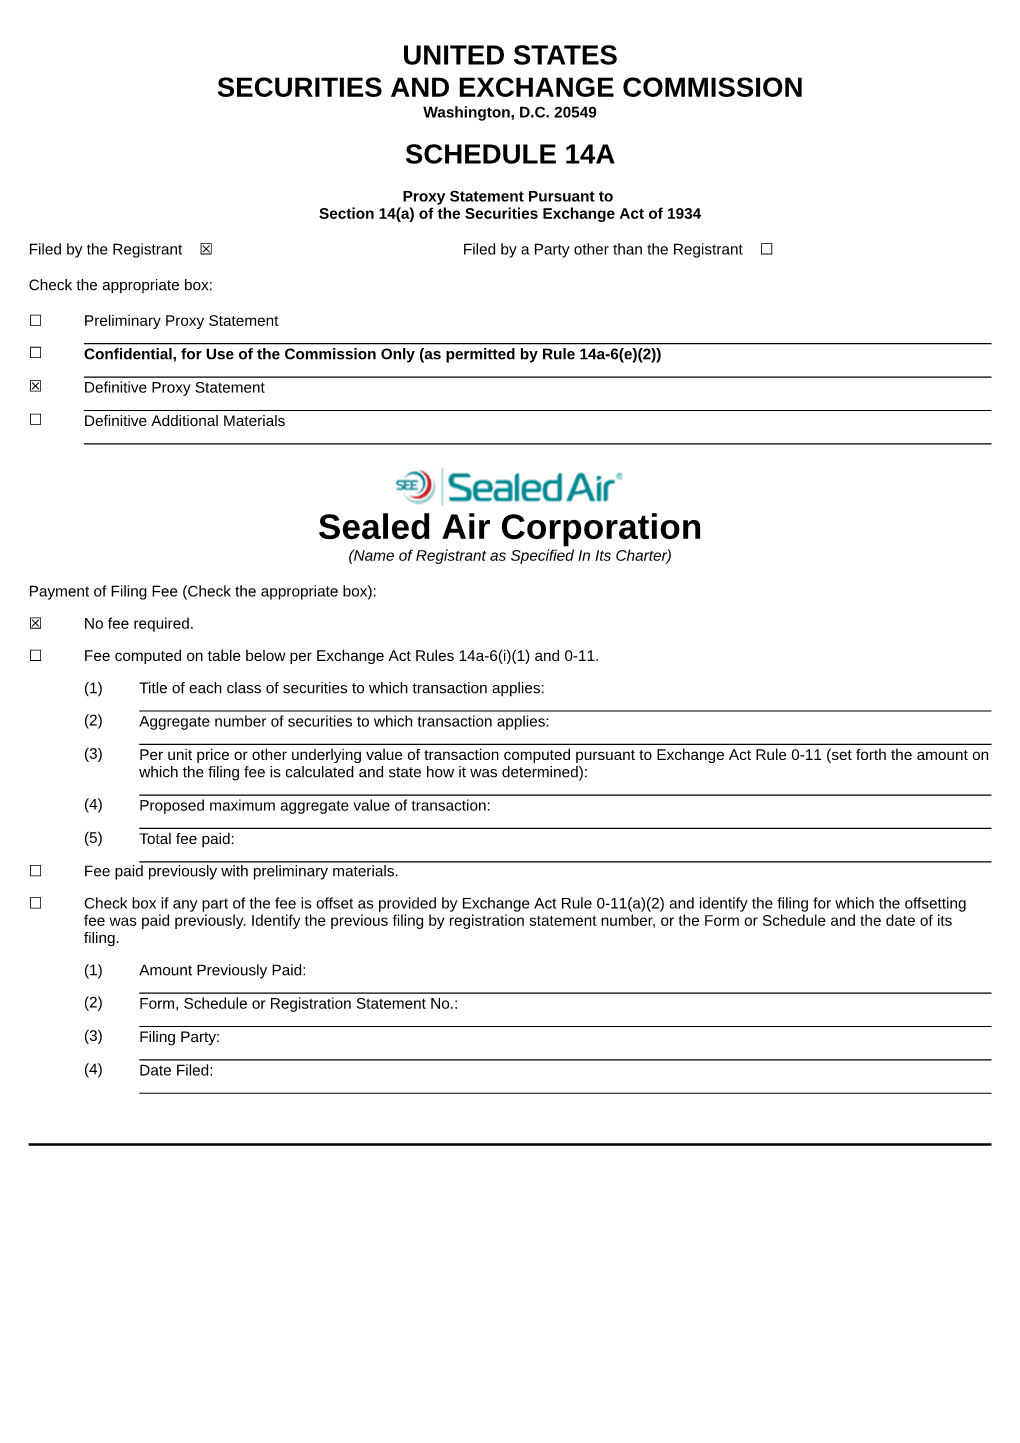 Sealed Air Corporation (Name of Registrant As Specified in Its Charter)